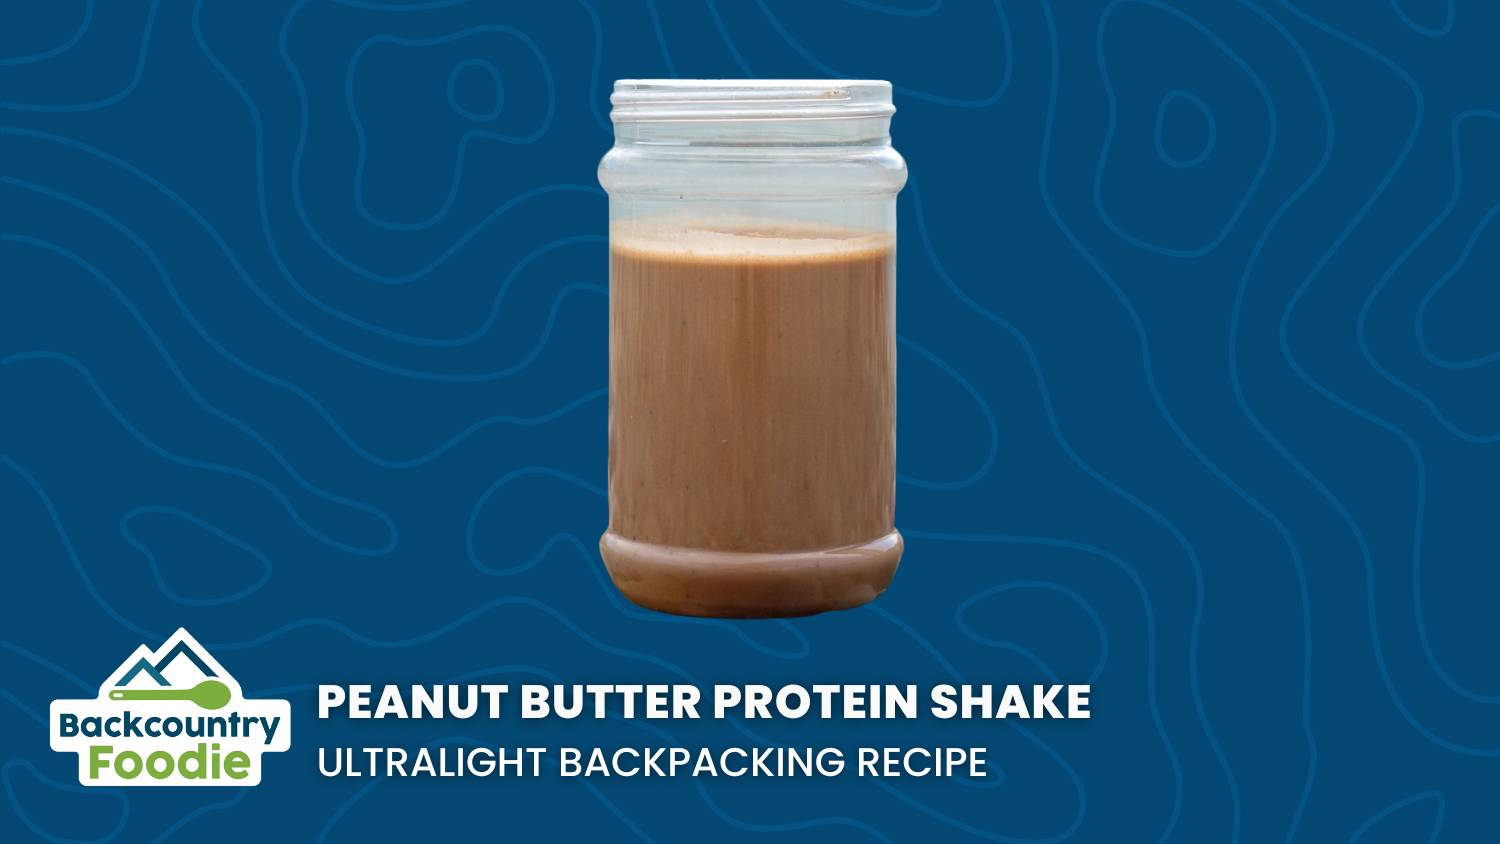 Backcountry Foodie Peanut Butter Protein Shake DIY ultralight Backpacking Recipe thumbnail image